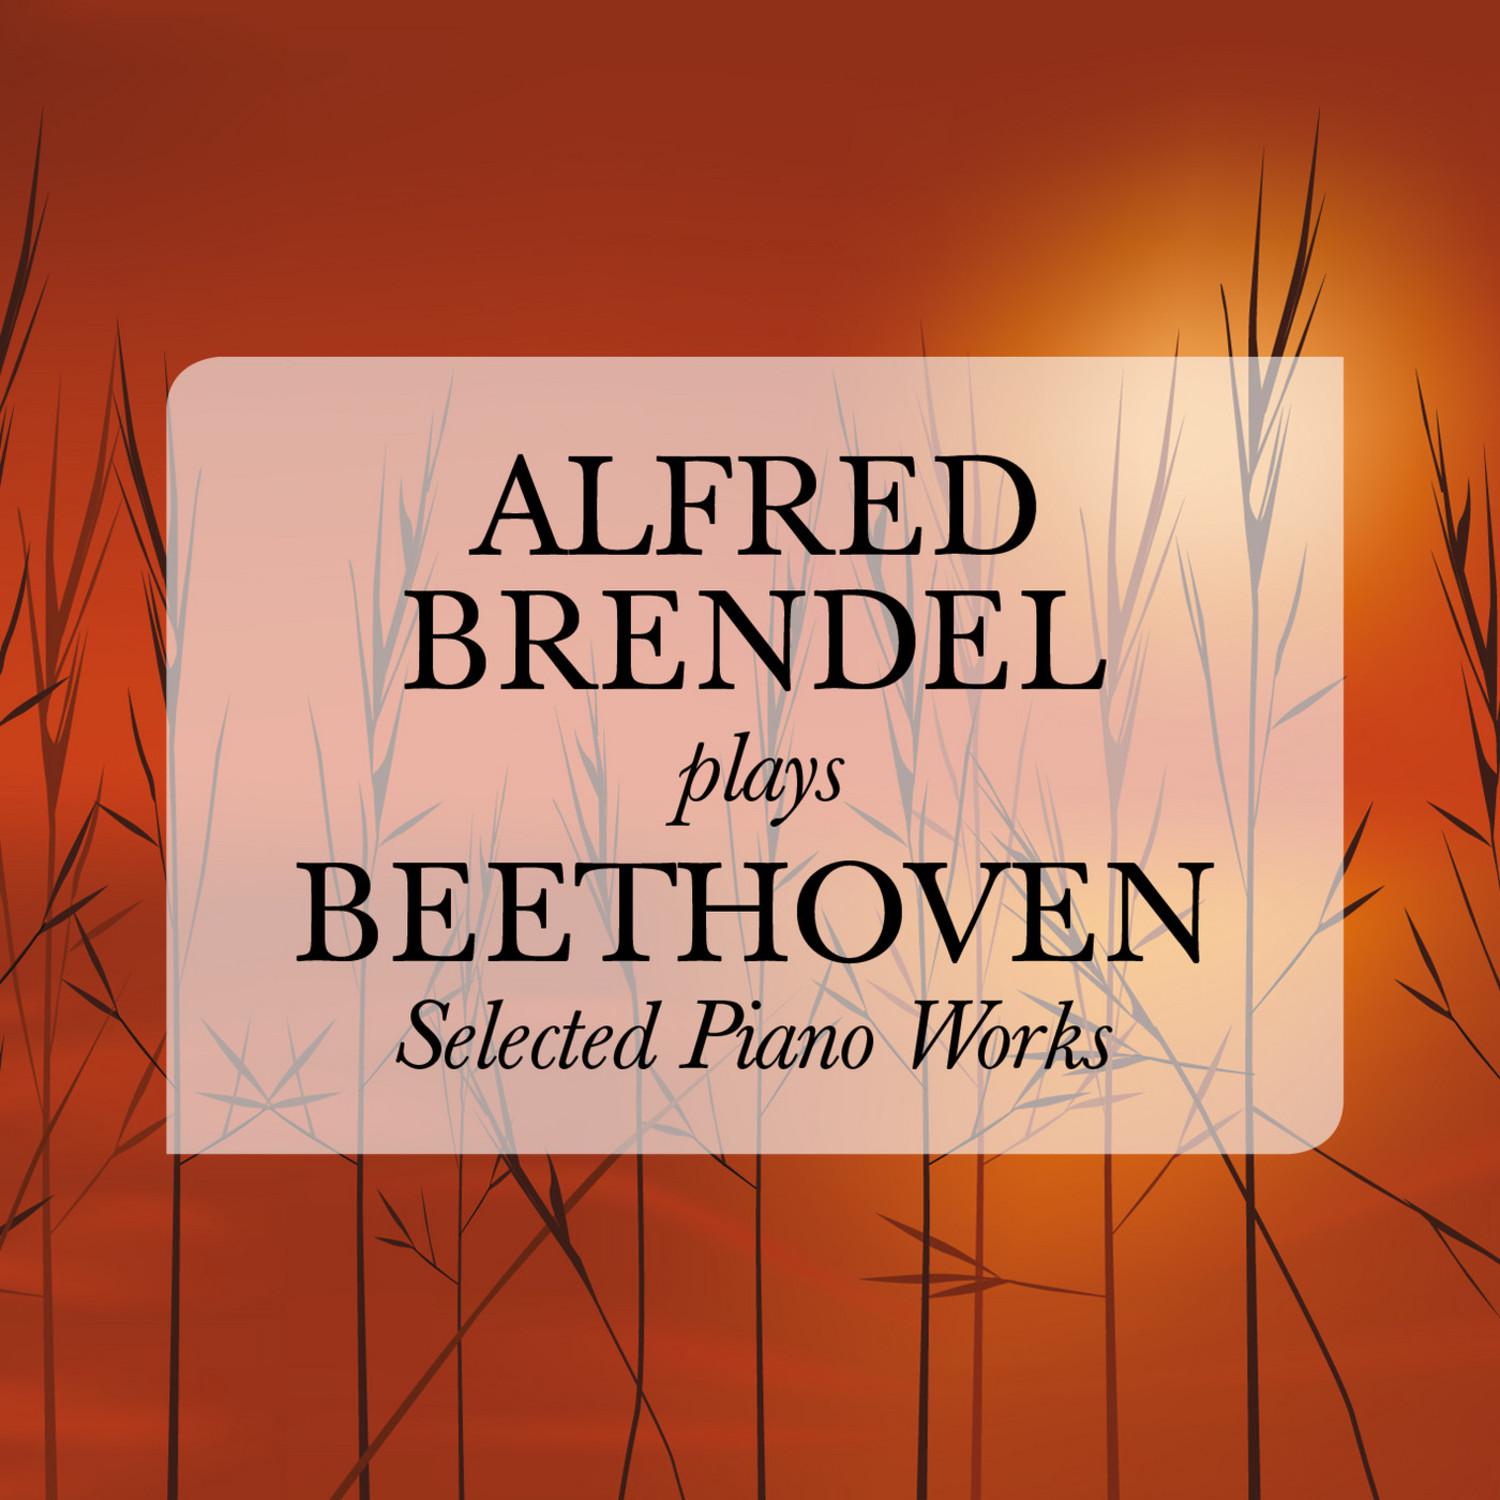 Alfred Brendel plays Beethoven: Selected Piano Works